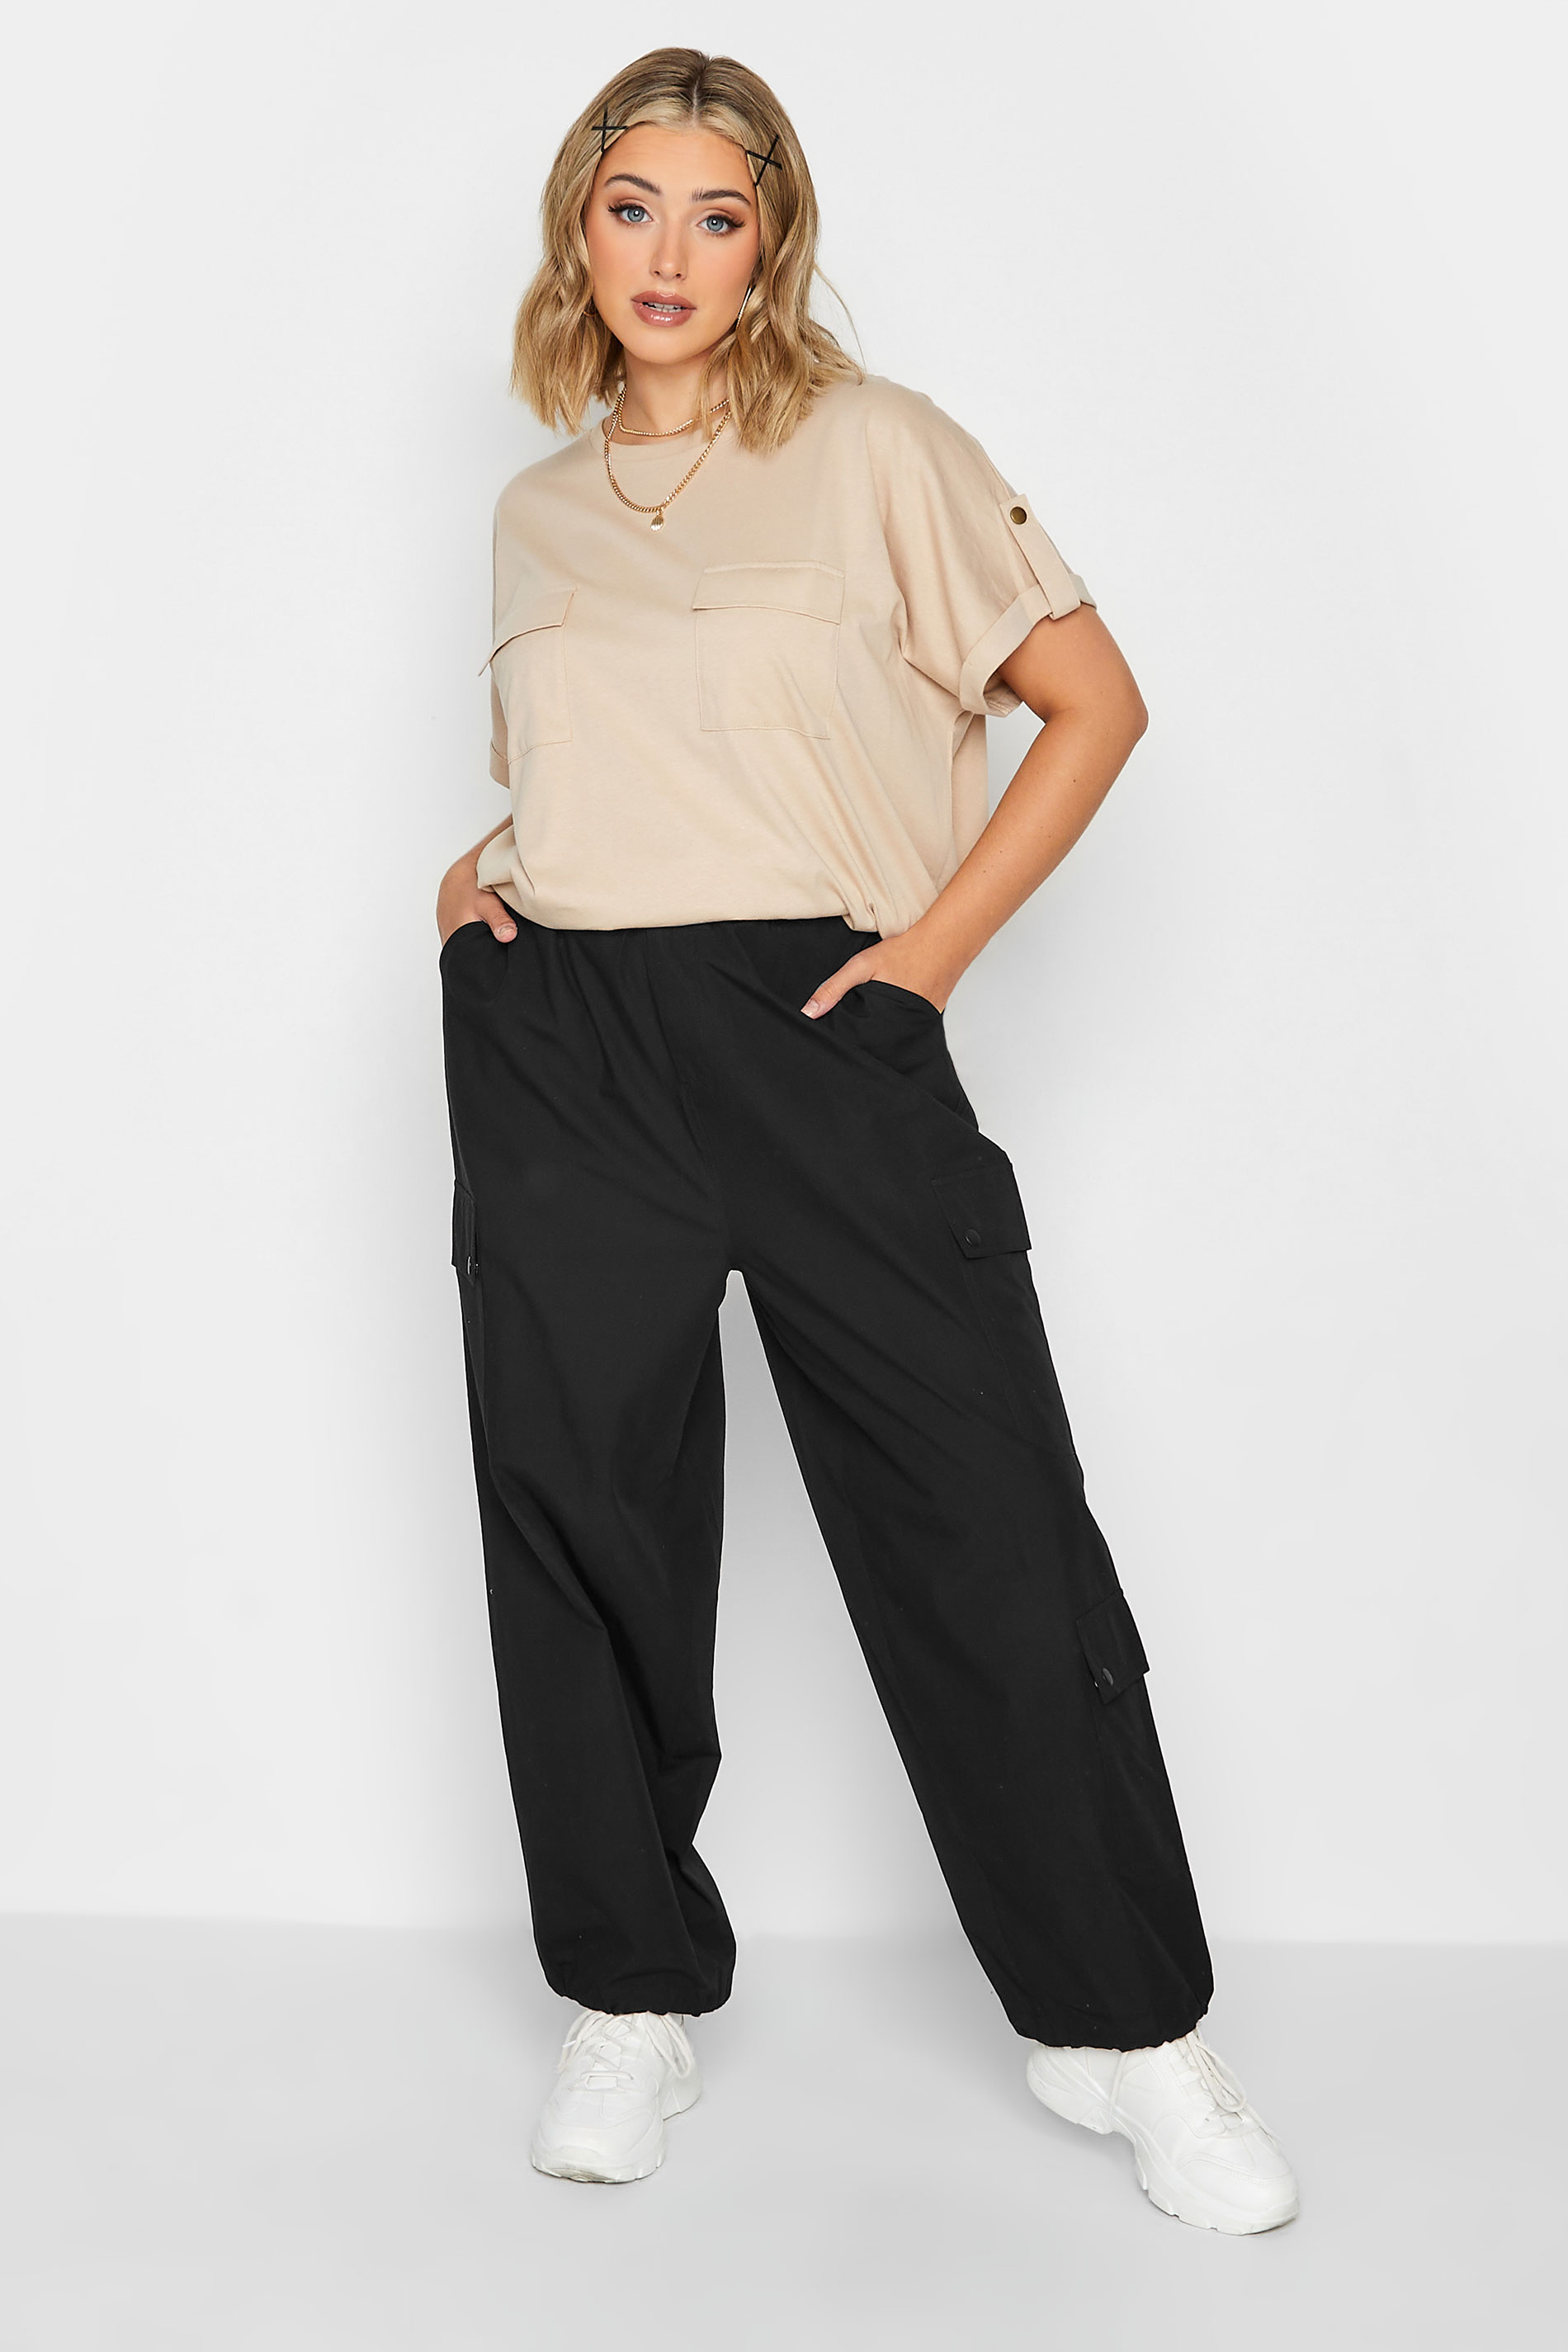 Ladies Plus Size Trousers UK – Kit and Kaboodal